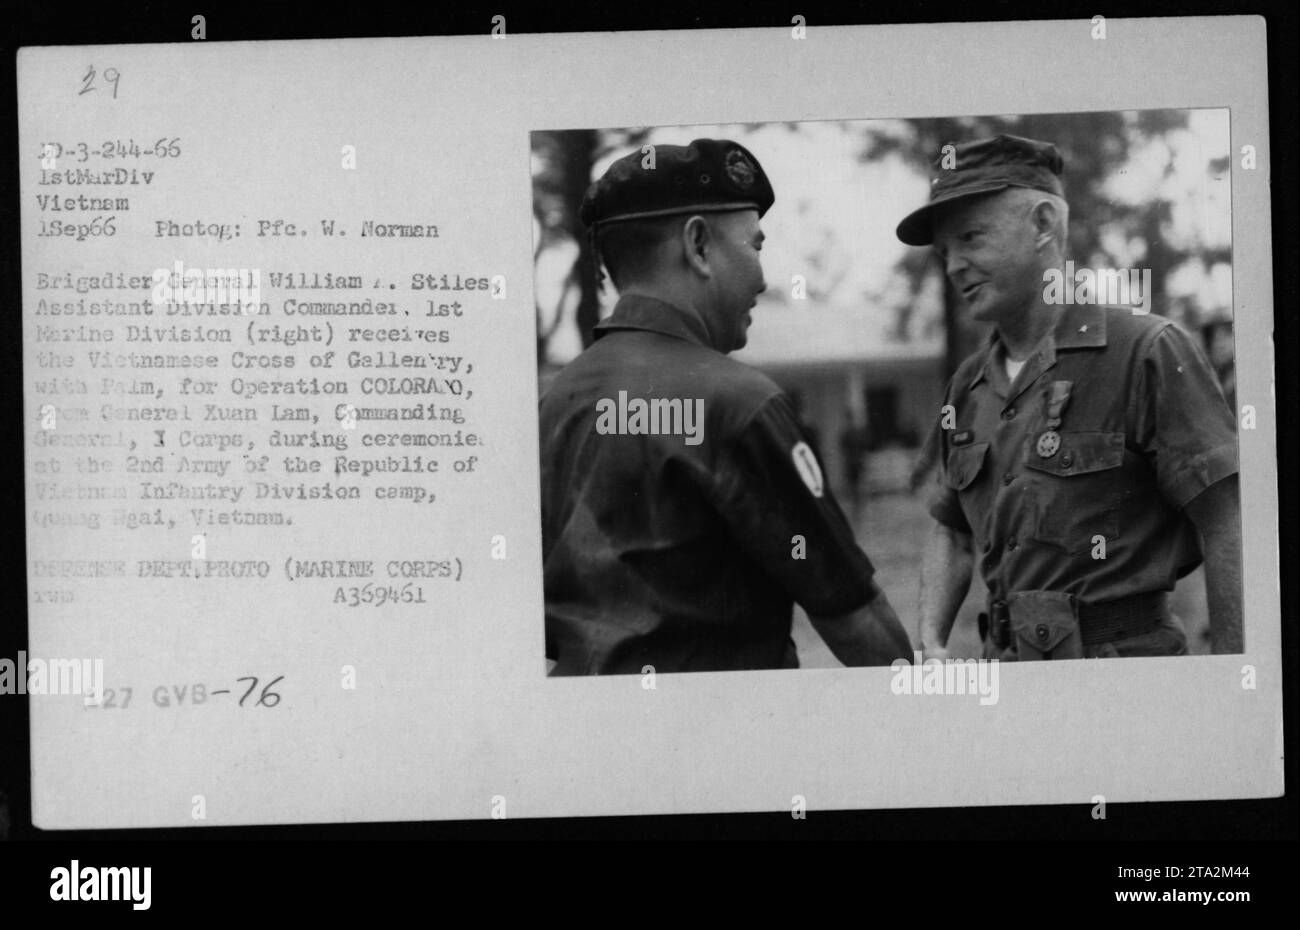 Brigadier General William Stiles, Assistant Division Commanders of the 1st Marine Division, receives the Vietnamese Cross of Gallantry with Palm from General Xuan Lam, Commanding General, I Corps, during a ceremony at the 2nd Army of the Republic of Vietnam Infantry Division camp in Ng ilgai, Vietnam. Stock Photo